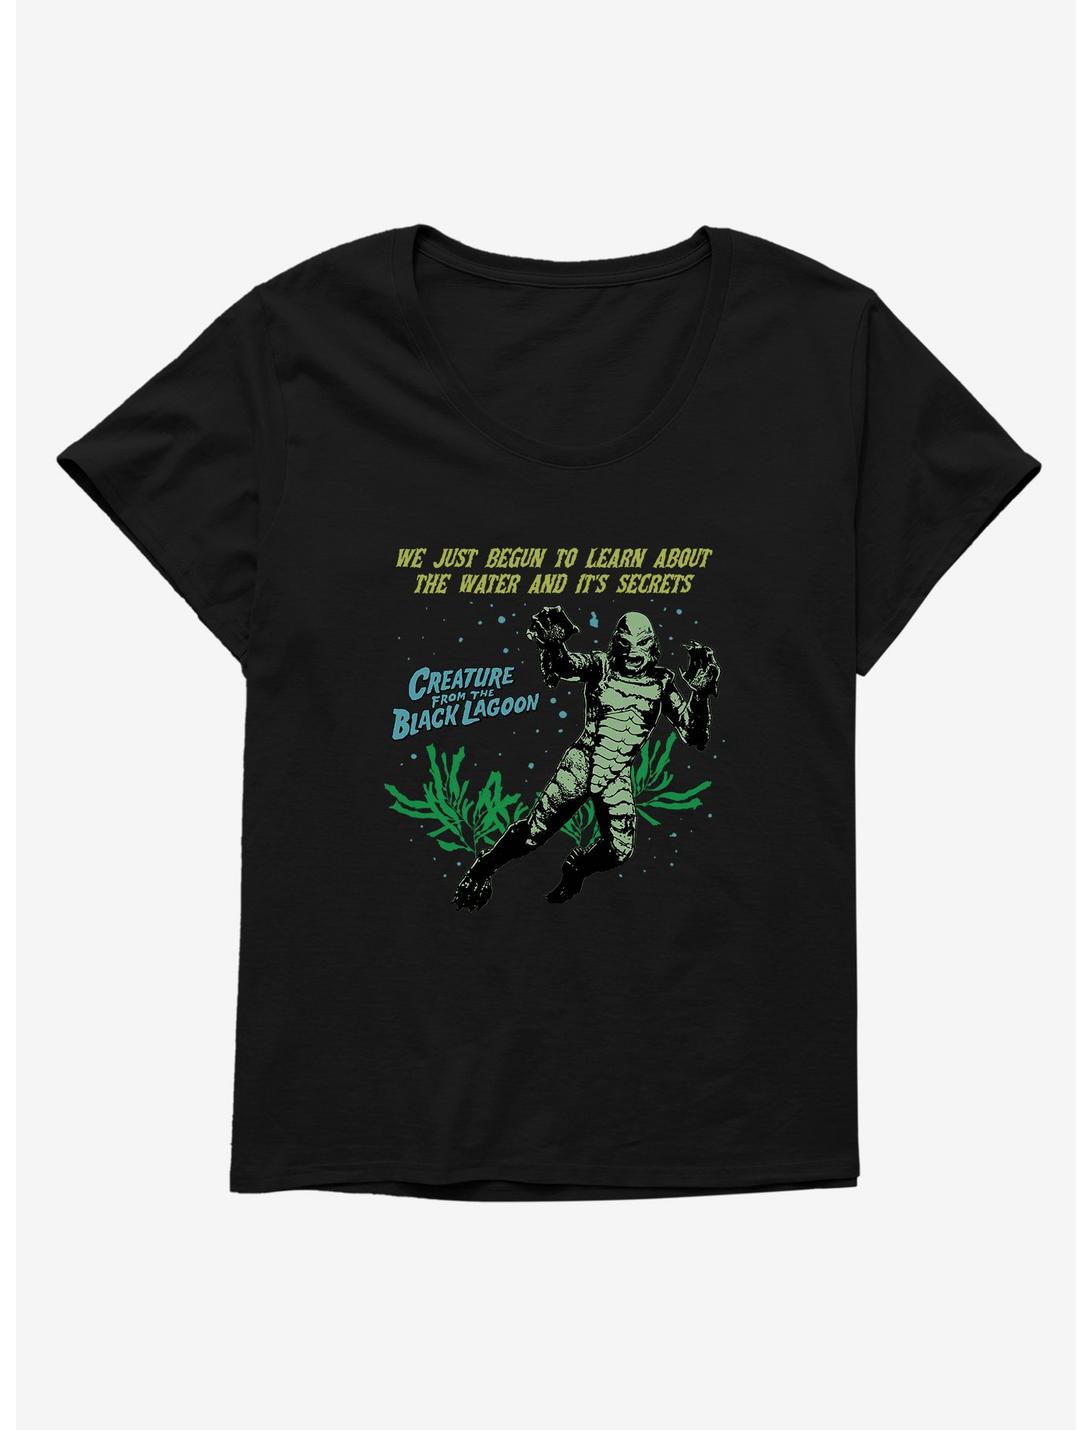 Creature From The Black Lagoon Water And It's Secrets Girls T-Shirt Plus Size, BLACK, hi-res